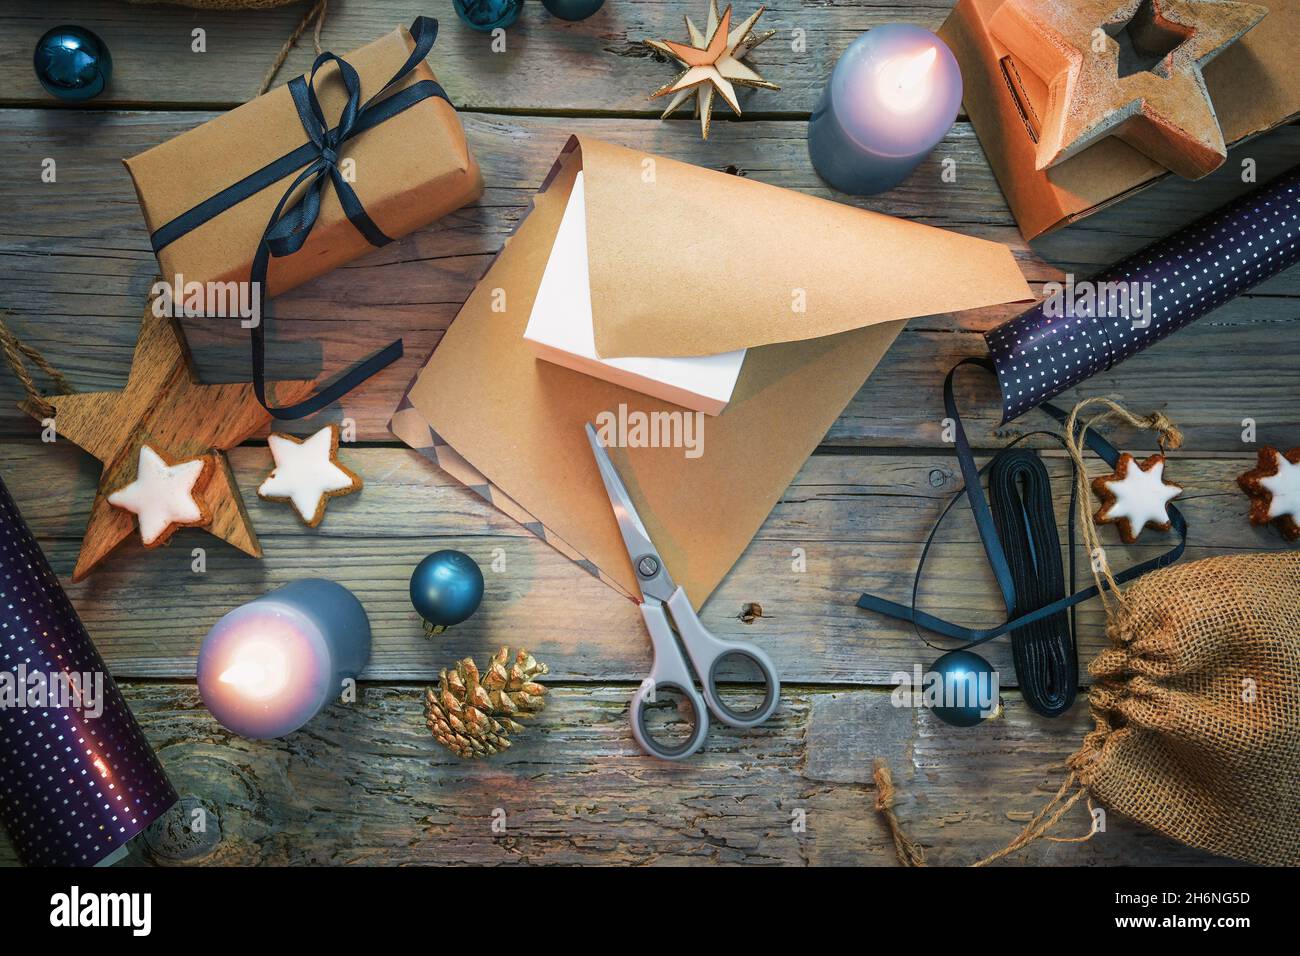 Roll Of Wrapping Paper Scissors Gift Bow And Box On Wooden Table Flat Lay  Stock Photo - Download Image Now - iStock